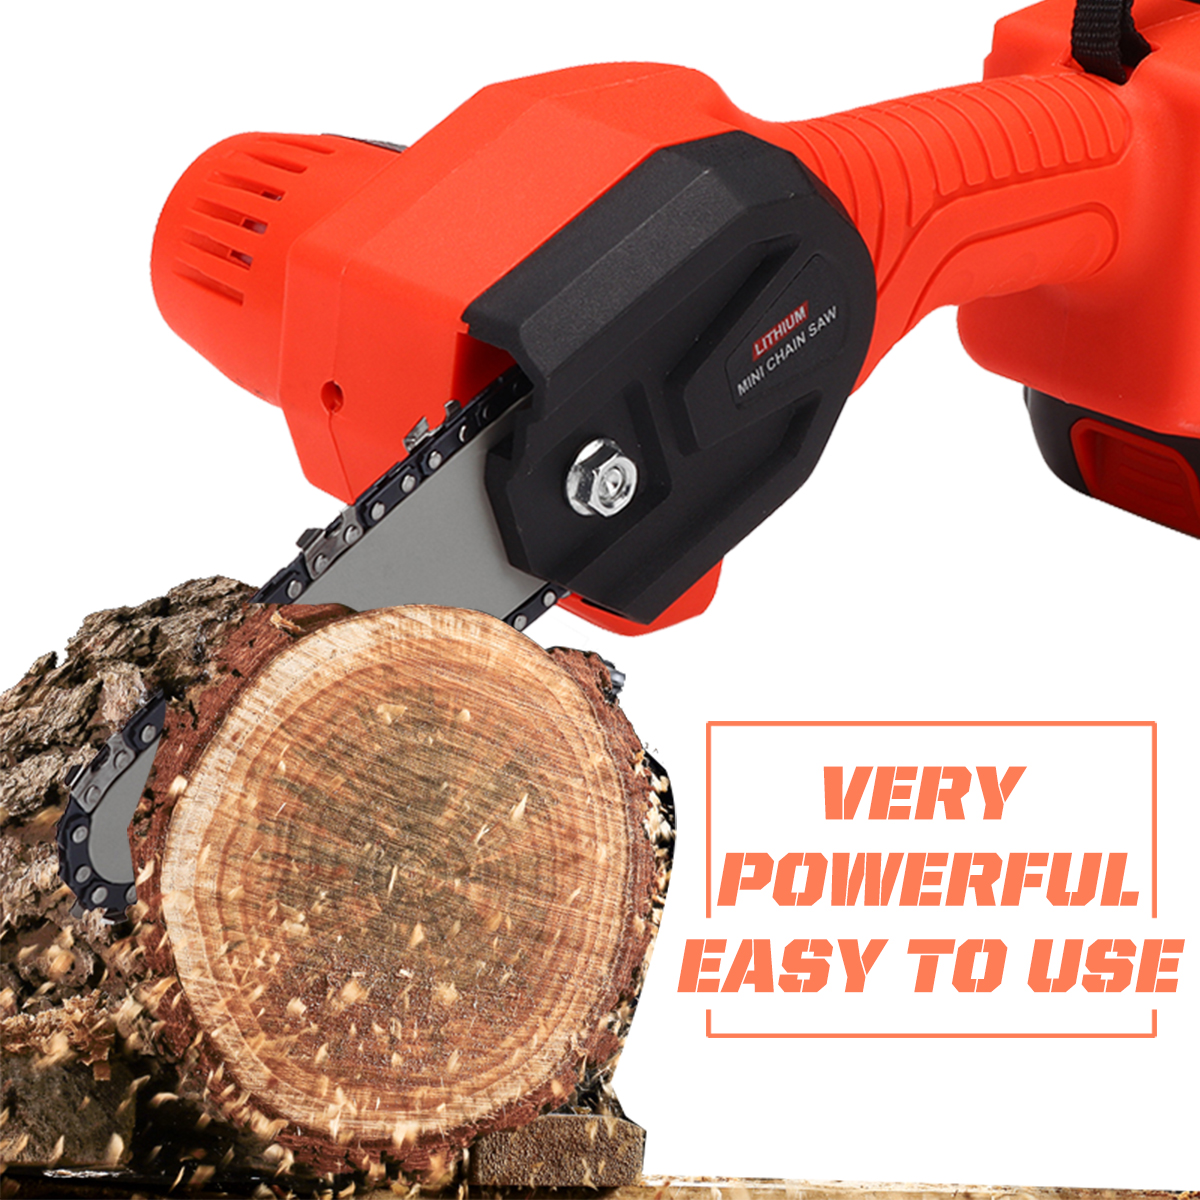 600W-4Inch-Cordless-Electric-Chain-Saw-Wood-Cutter-Tools-Garden-Woodwork-W-1pc-or-2pcs-Battery-1801758-2